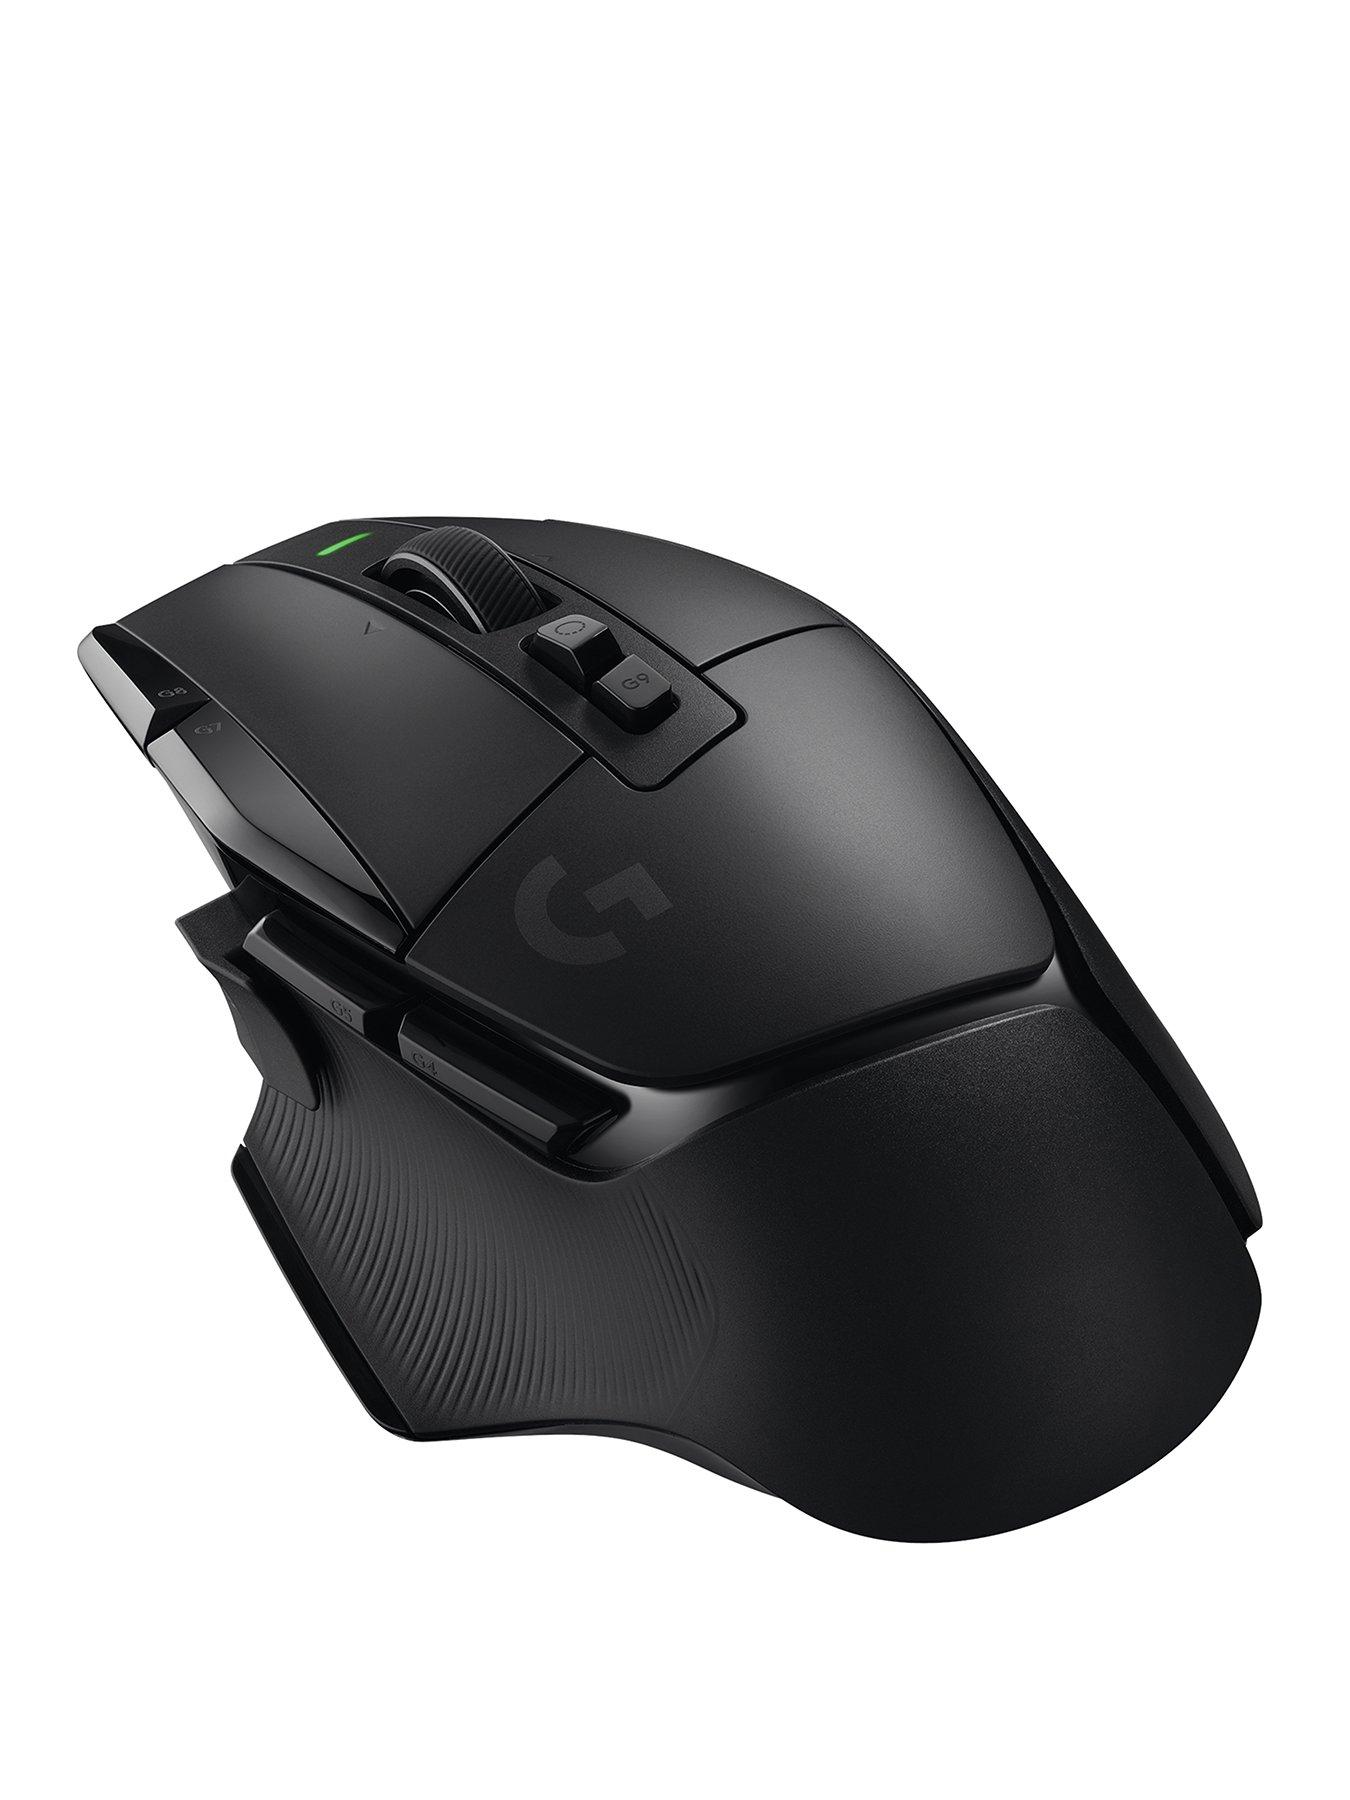 Logitech G305 LIGHTSPEED Wireless Gaming Mouse & G435 LIGHTSPEED Wireless  Gaming Headset - Lightweight Peripherals with 12K DPI, 250h Battery Mouse